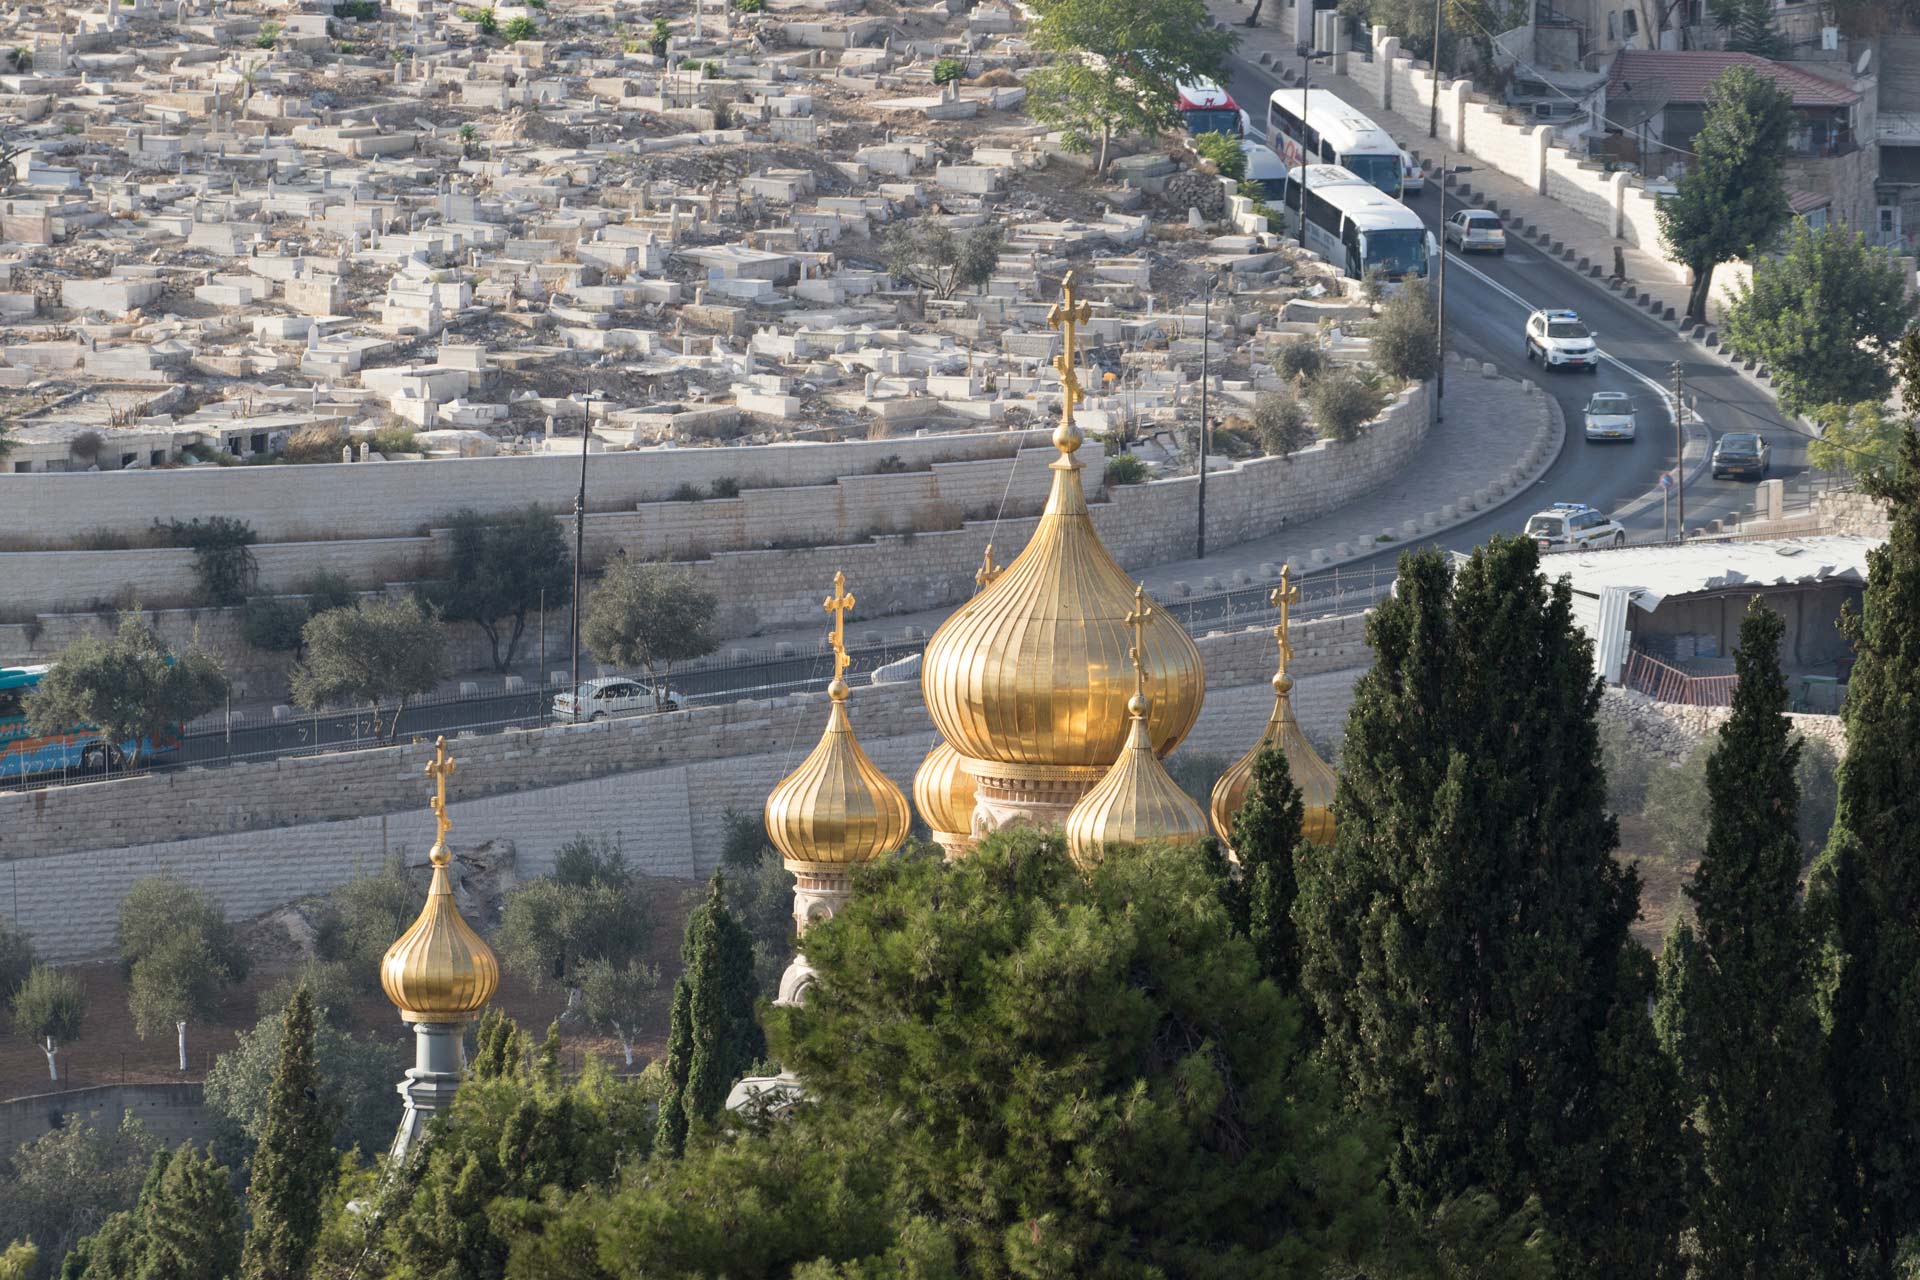 Panoramic view of the Old City with the Russian Orthodox Church of St. Mary Magdalene, Jerusalem, Israel